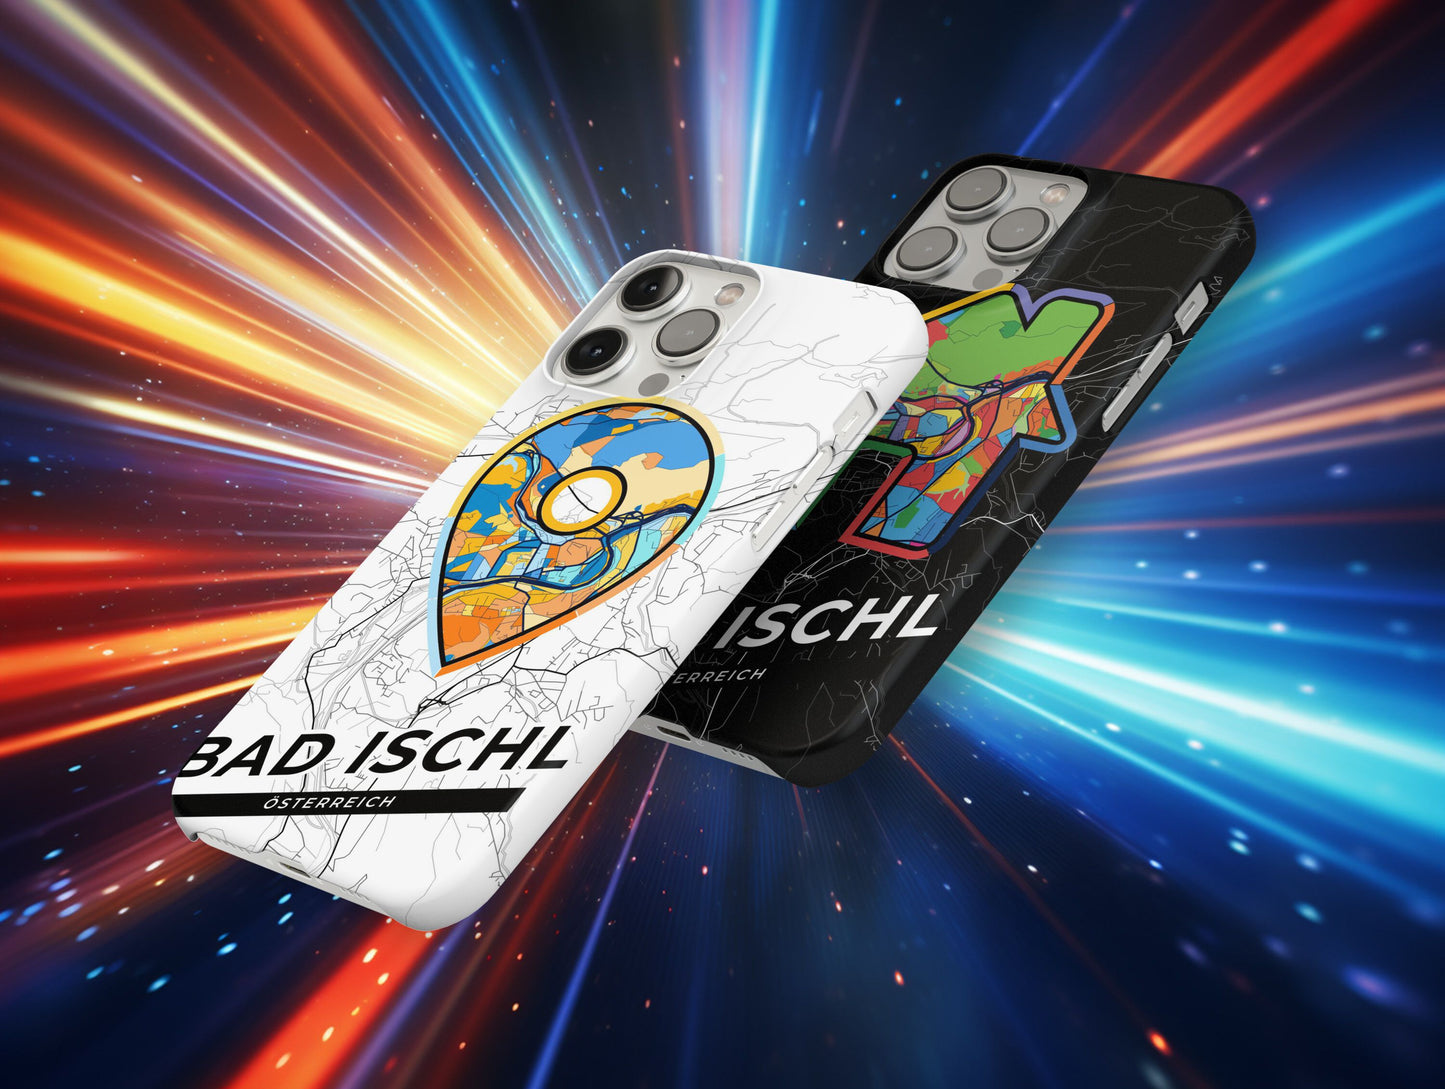 Bad Ischl Österreich slim phone case with colorful icon. Birthday, wedding or housewarming gift. Couple match cases.